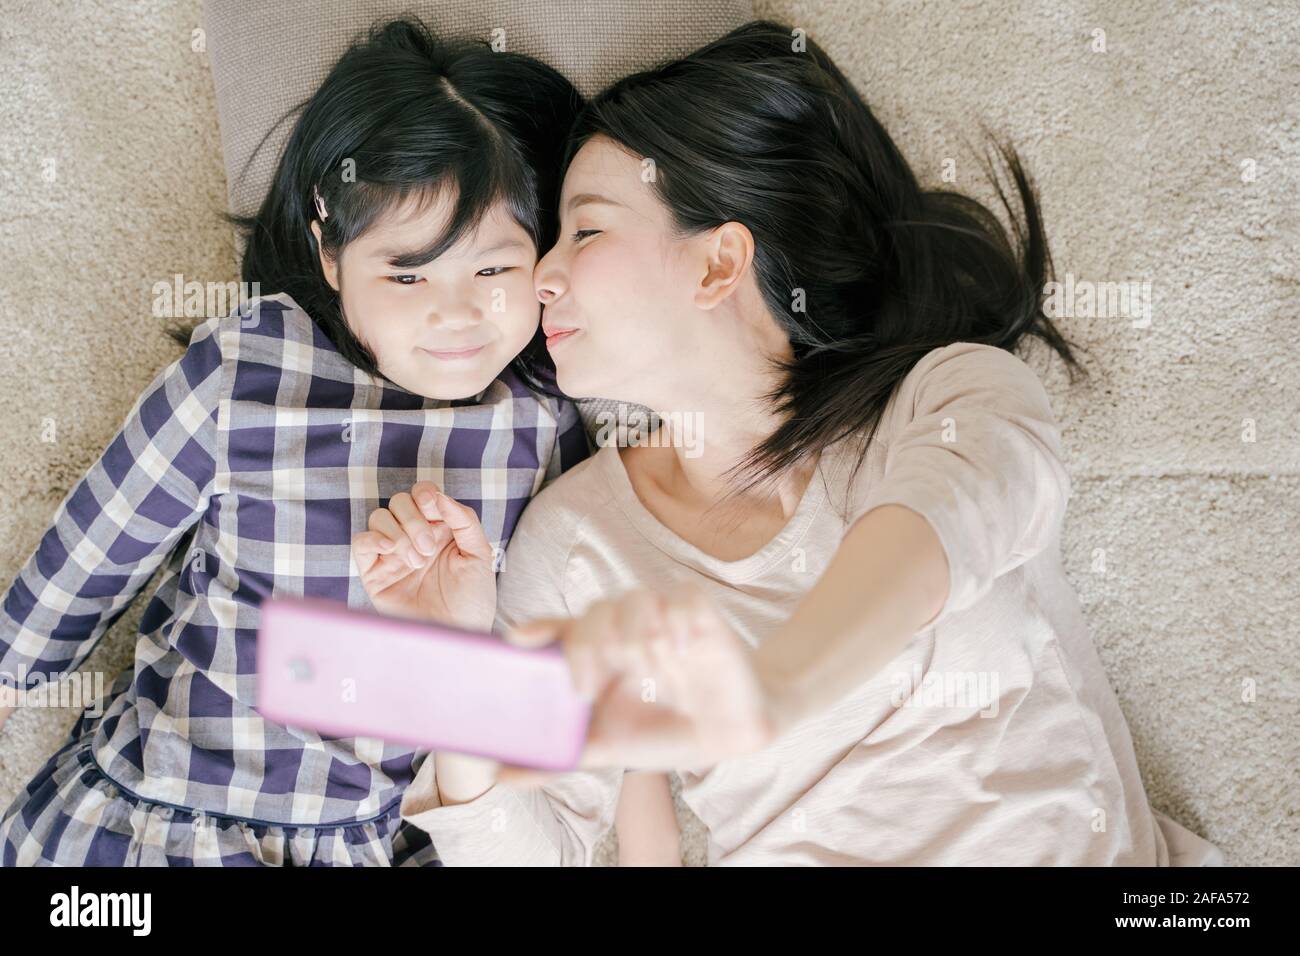 Mother is selfie with her little daughter using a smart phone camera while kissing daughter cheek Stock Photo